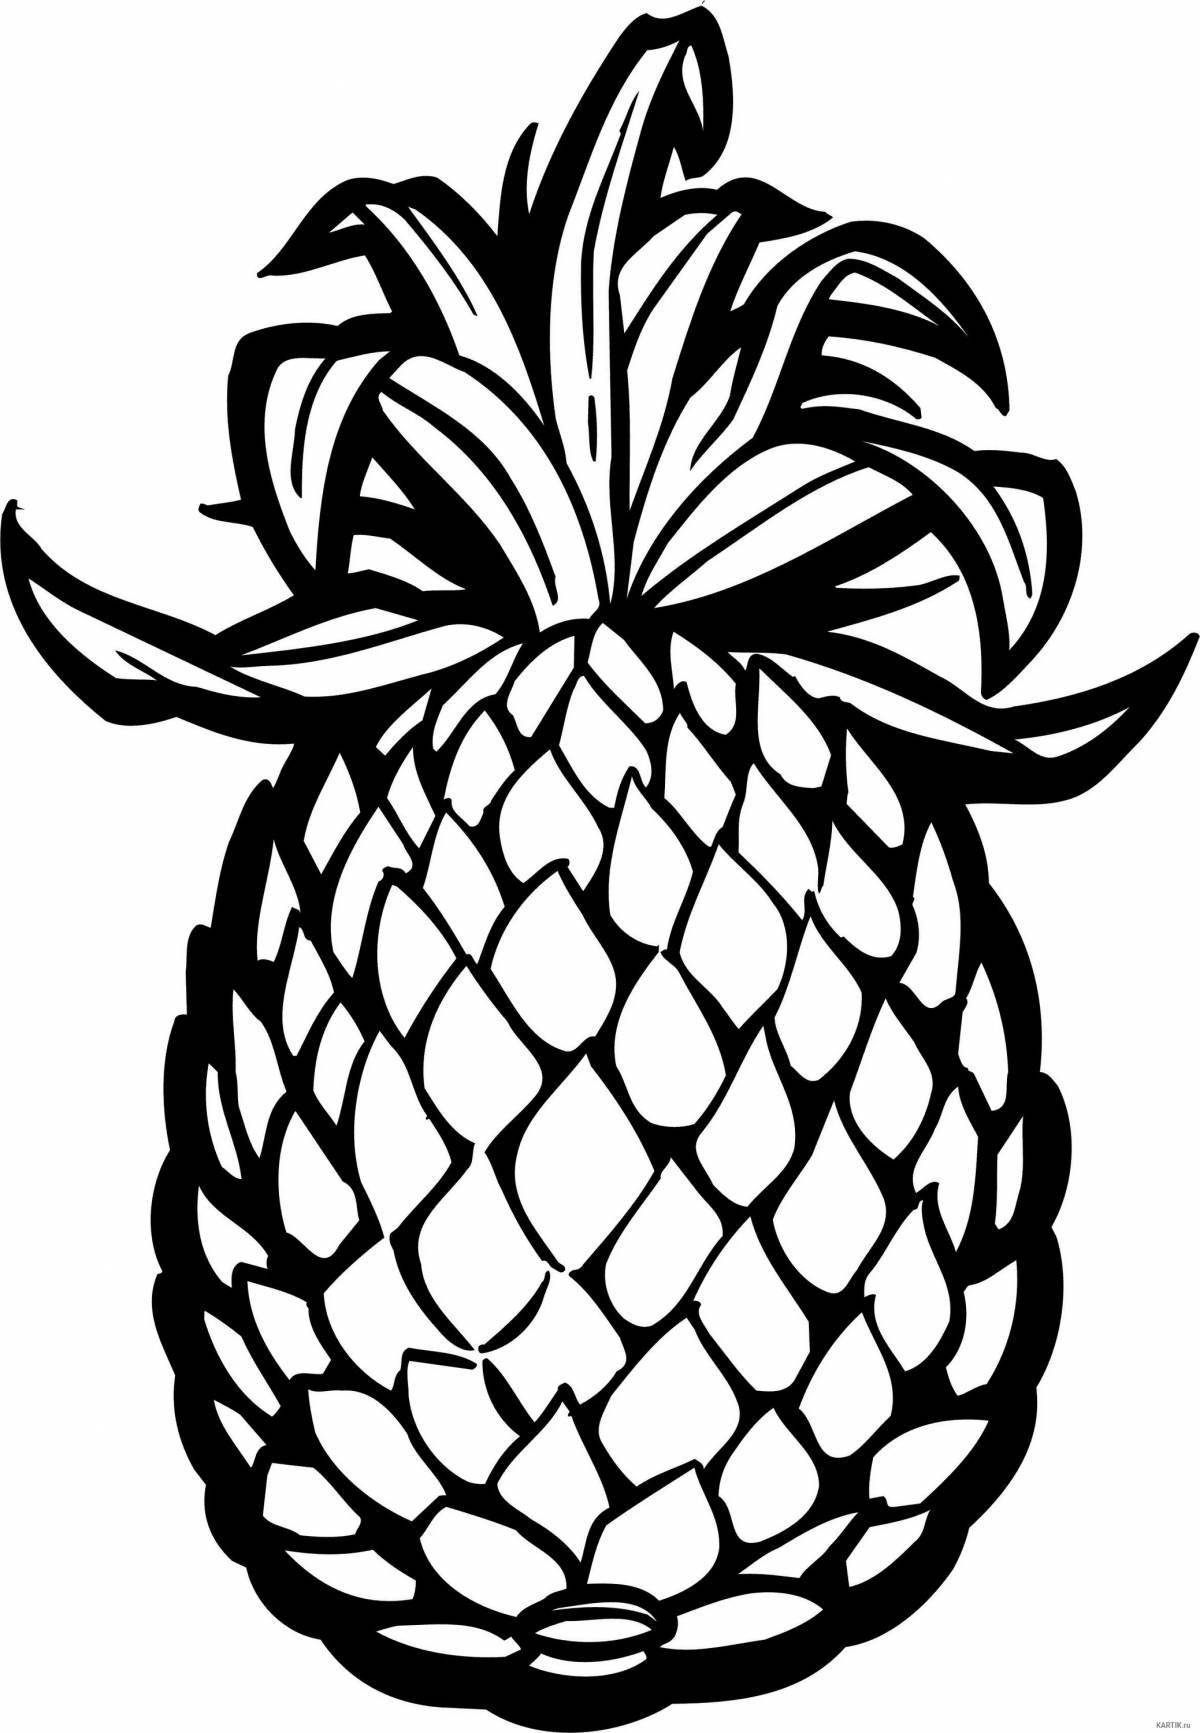 Fabulous pineapple coloring pages for kids